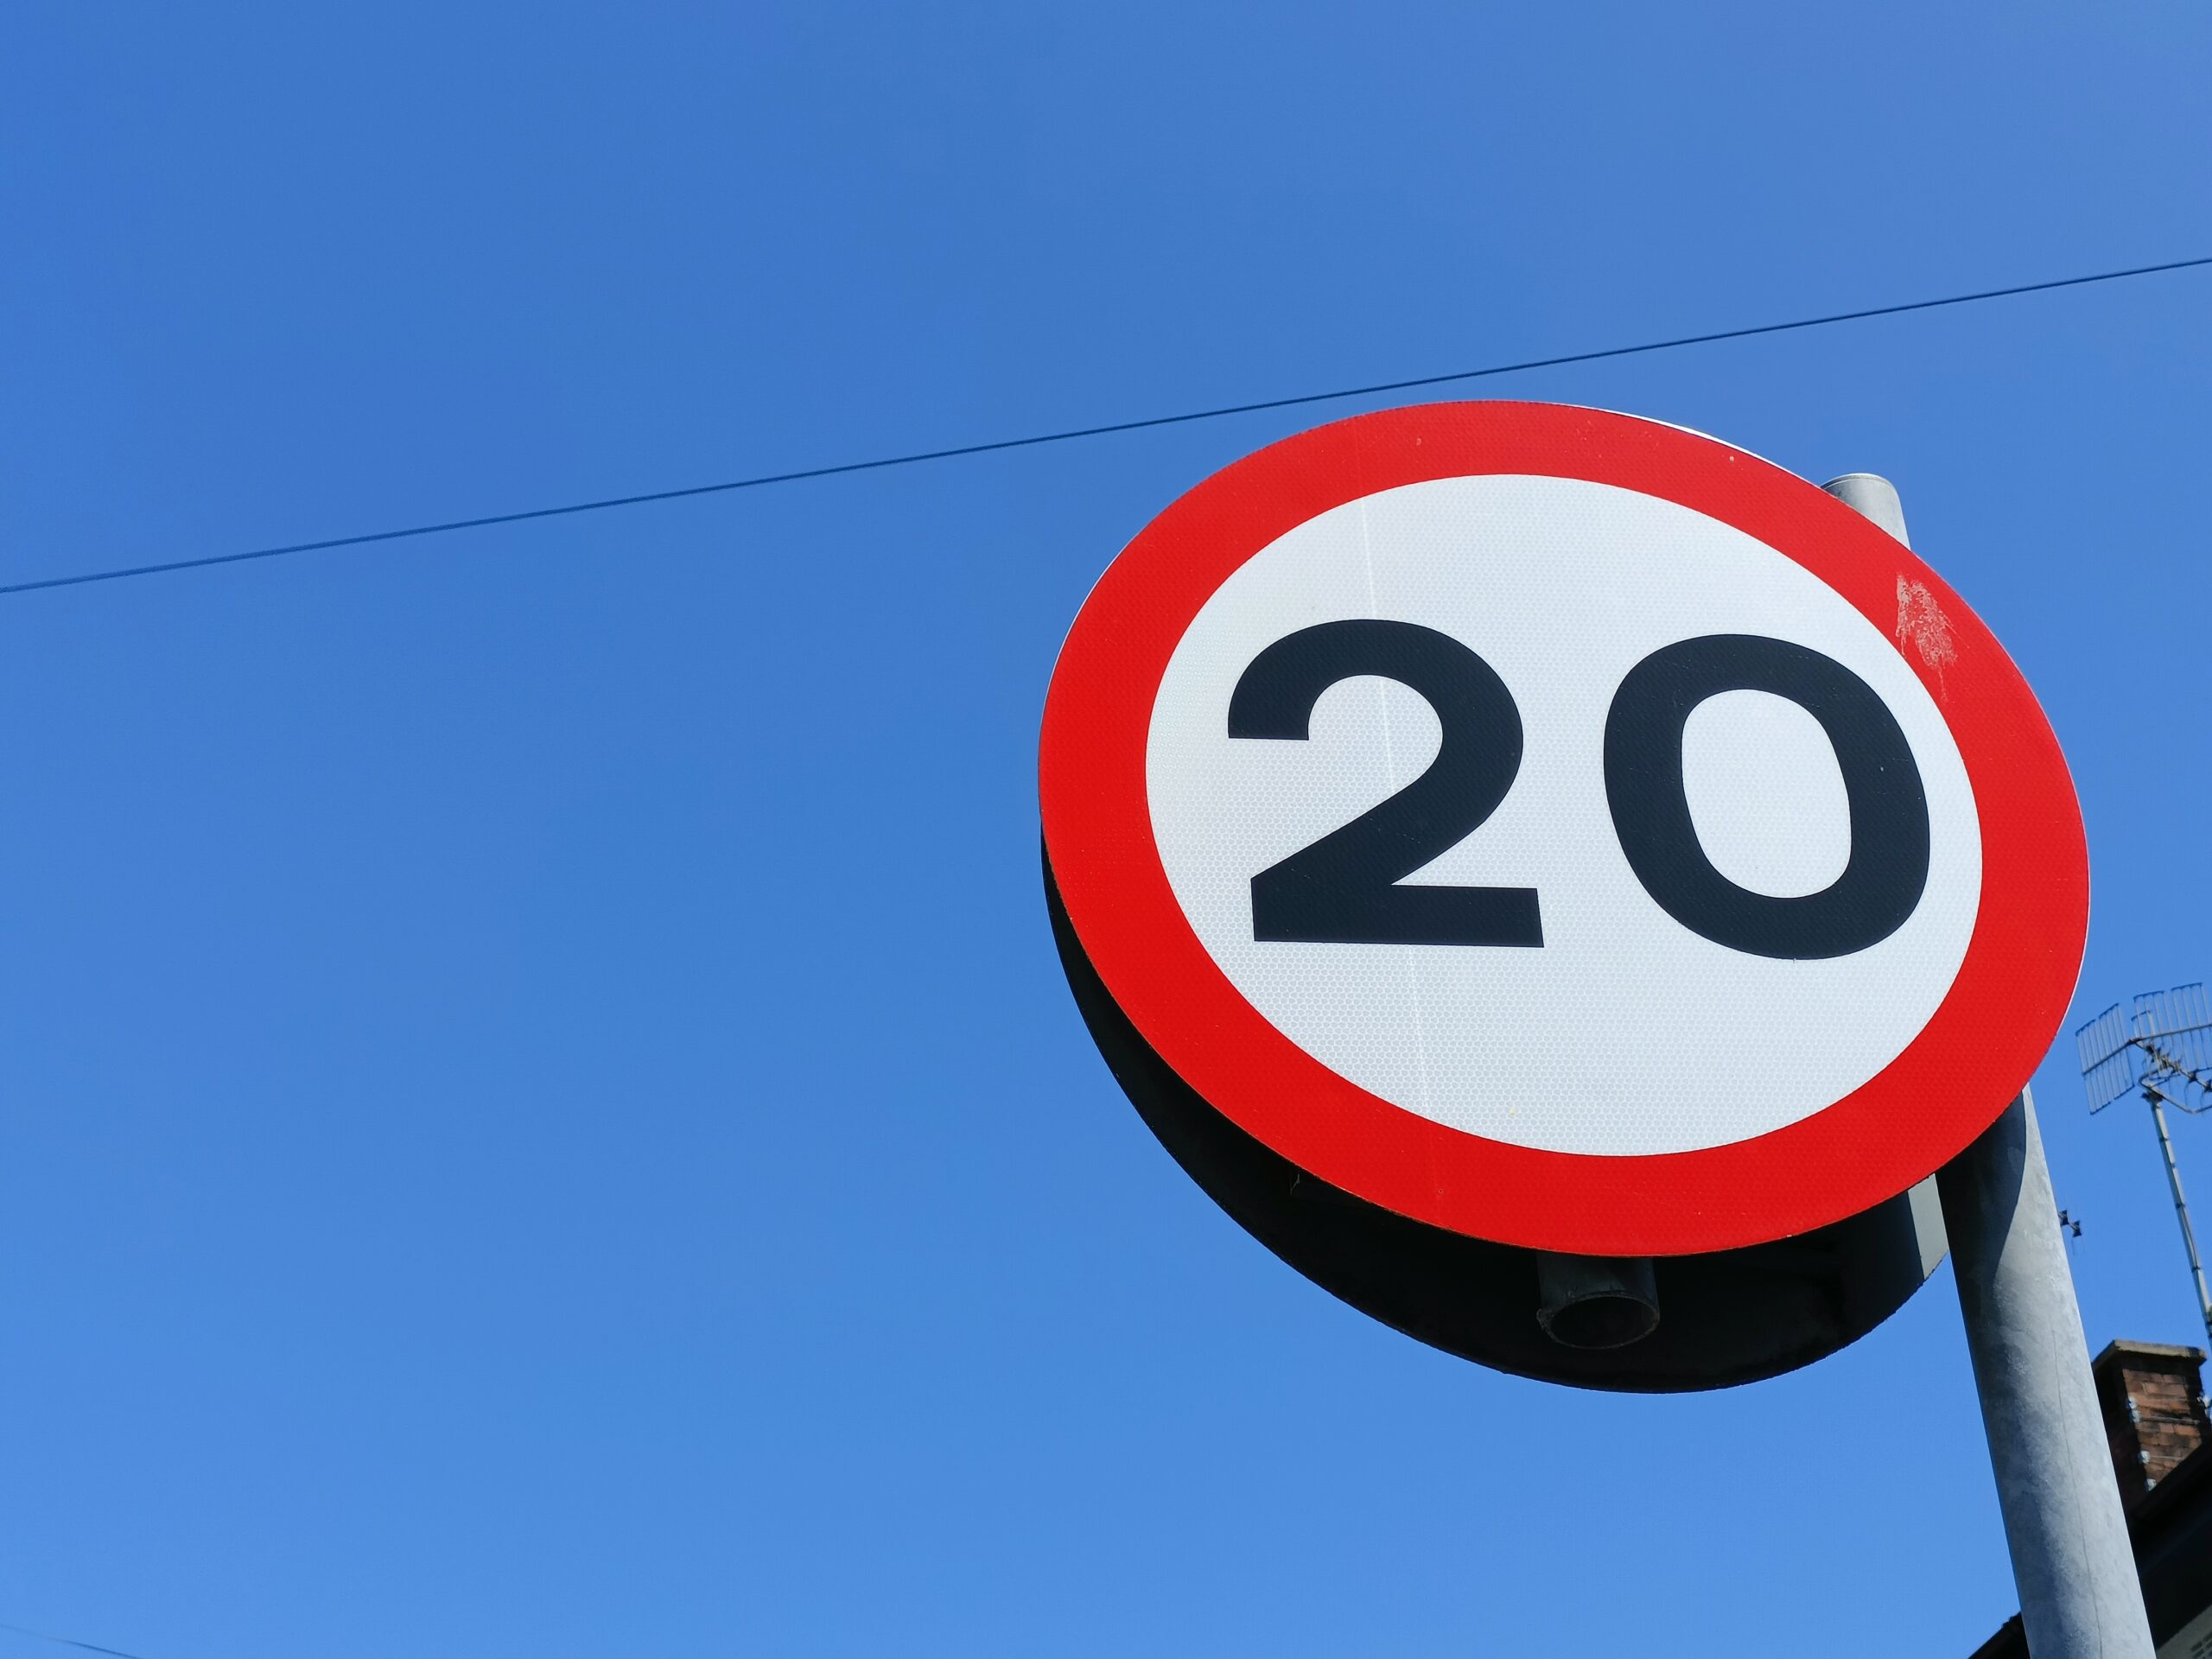 Call for discussion on applying 20mph limit by area as opposed to “blanket” roll-out to be put on hold